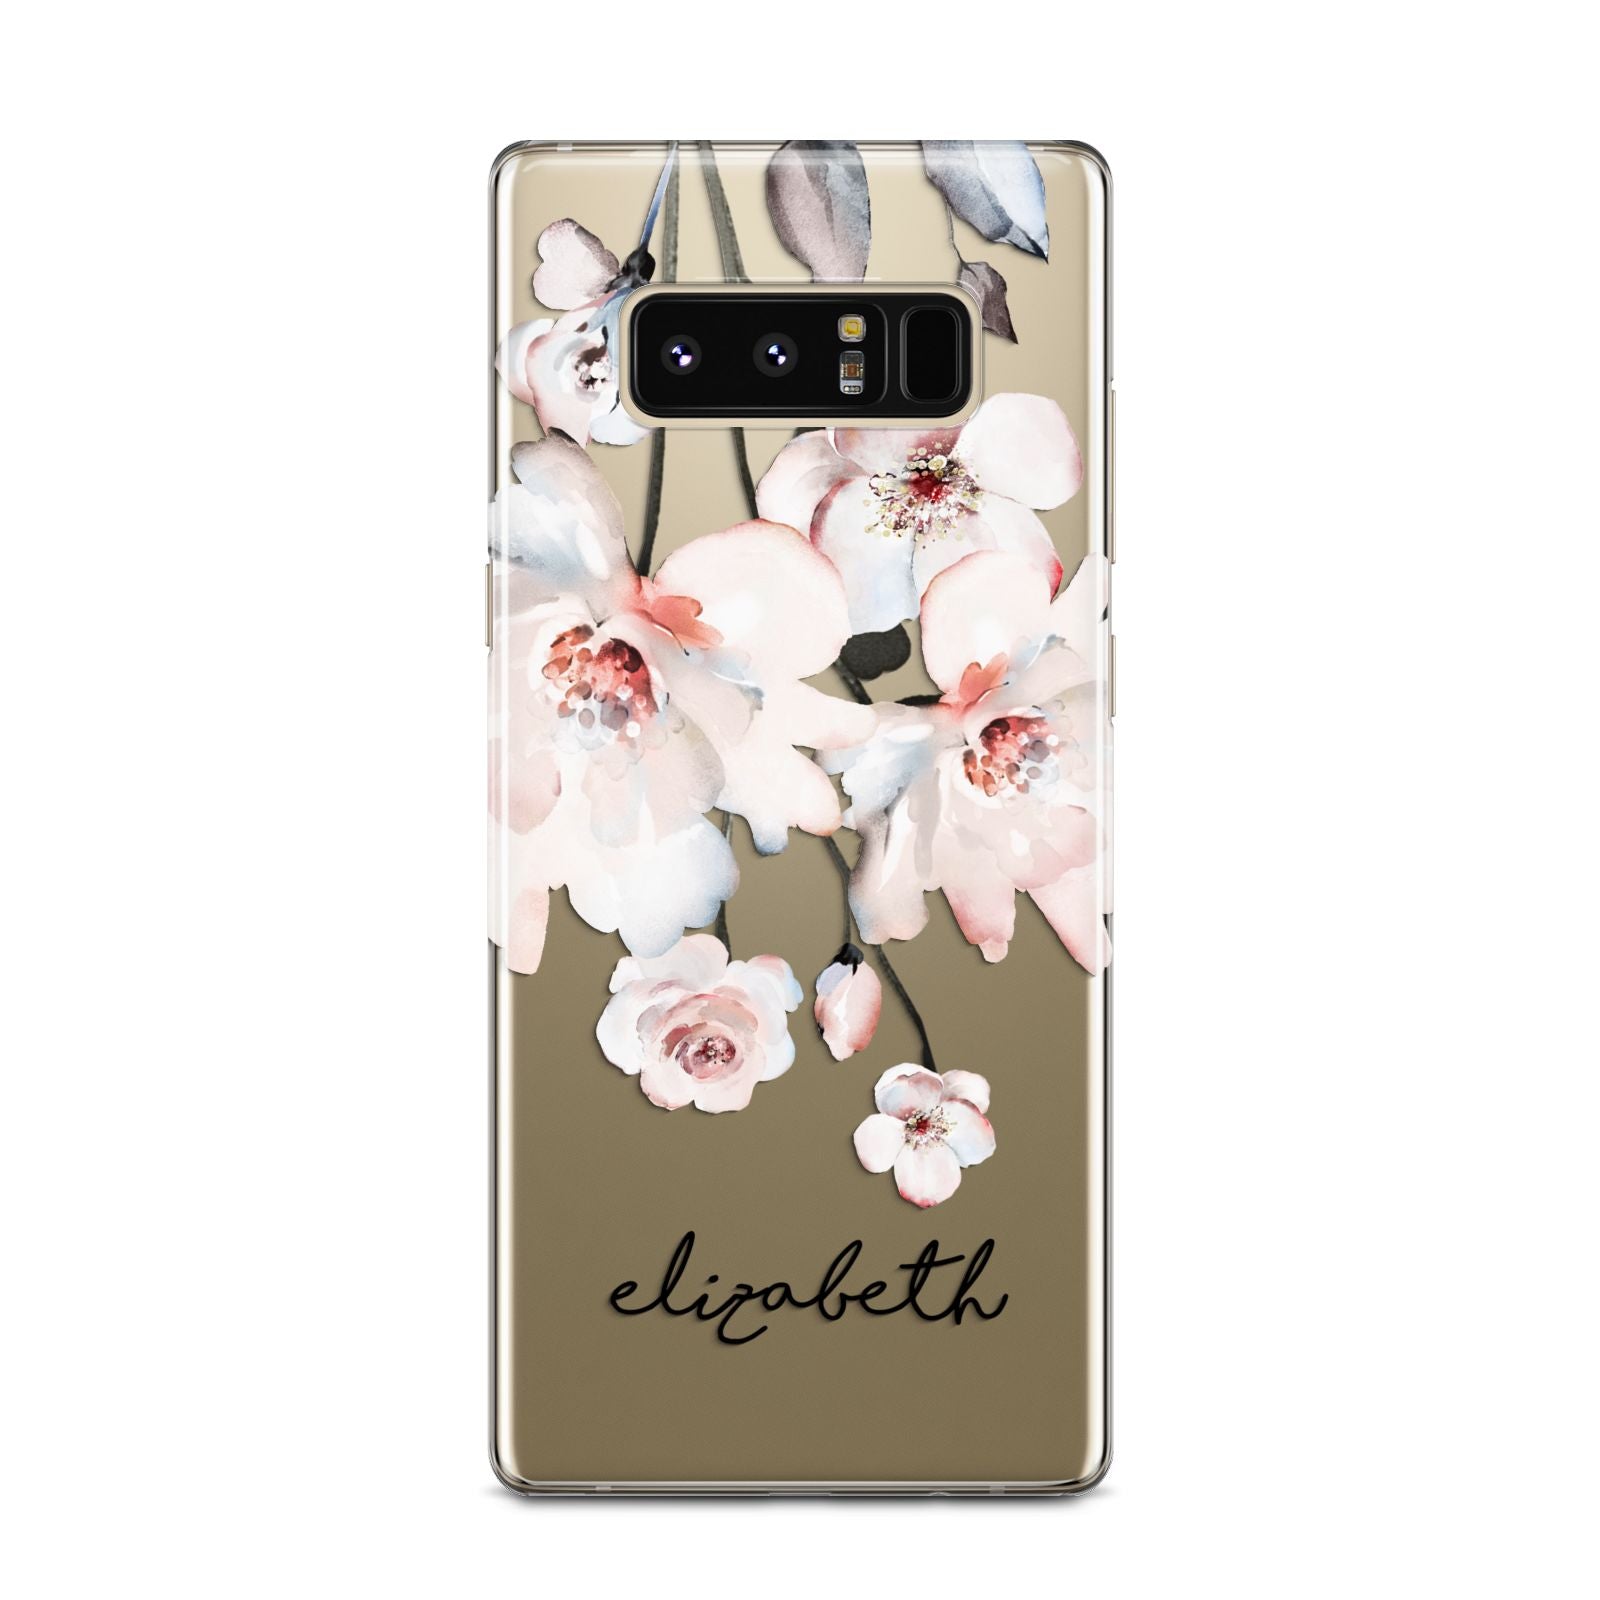 Personalised Name Roses Watercolour Samsung Galaxy Note 8 Case